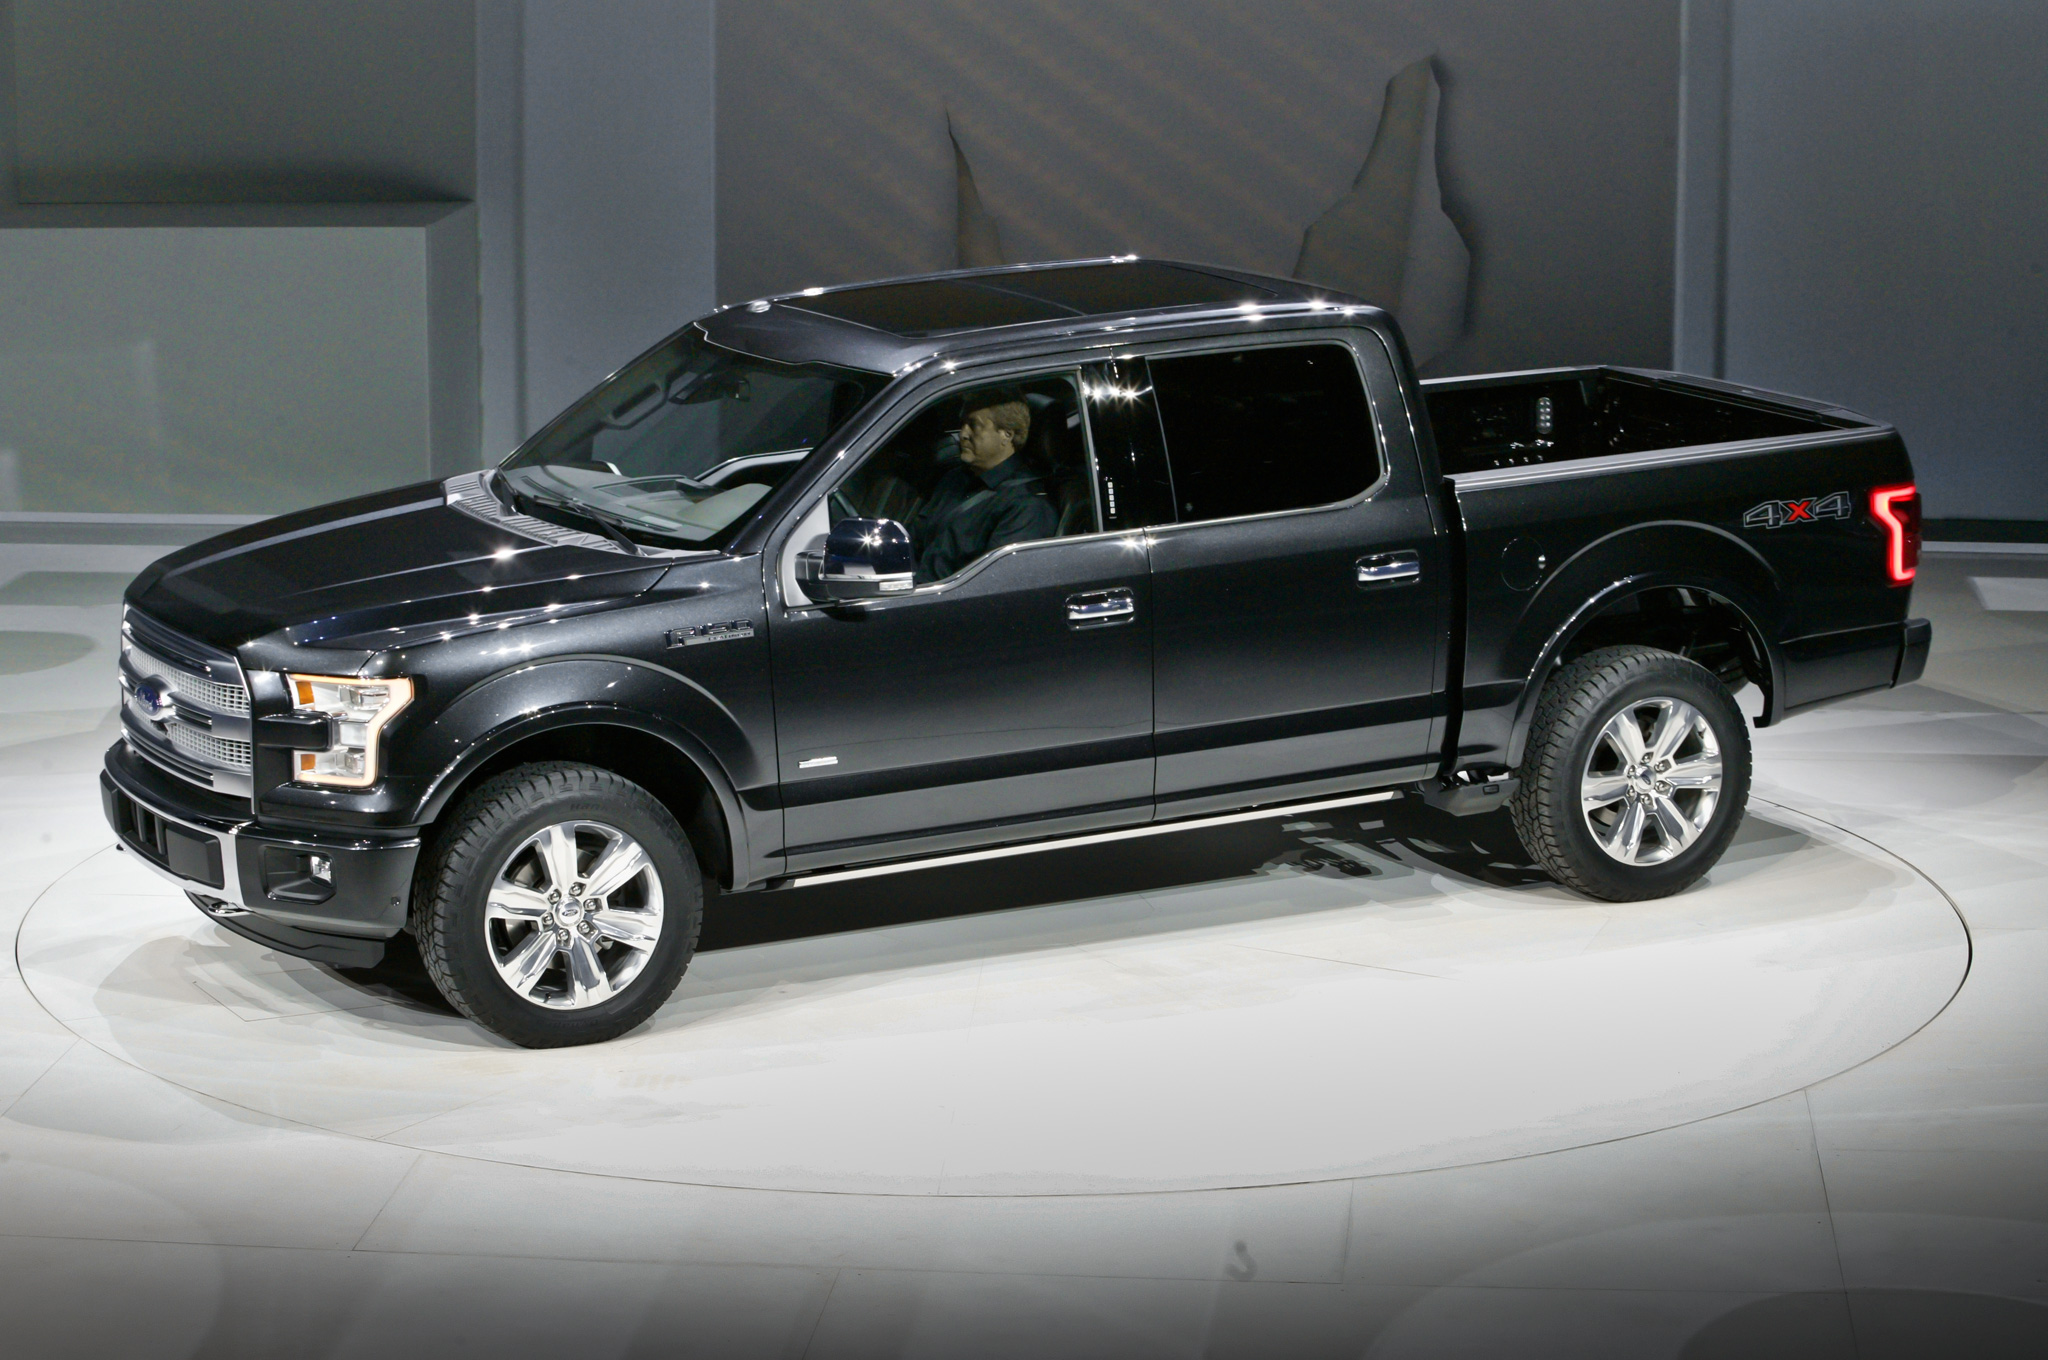 2015 Ford F-150 #6